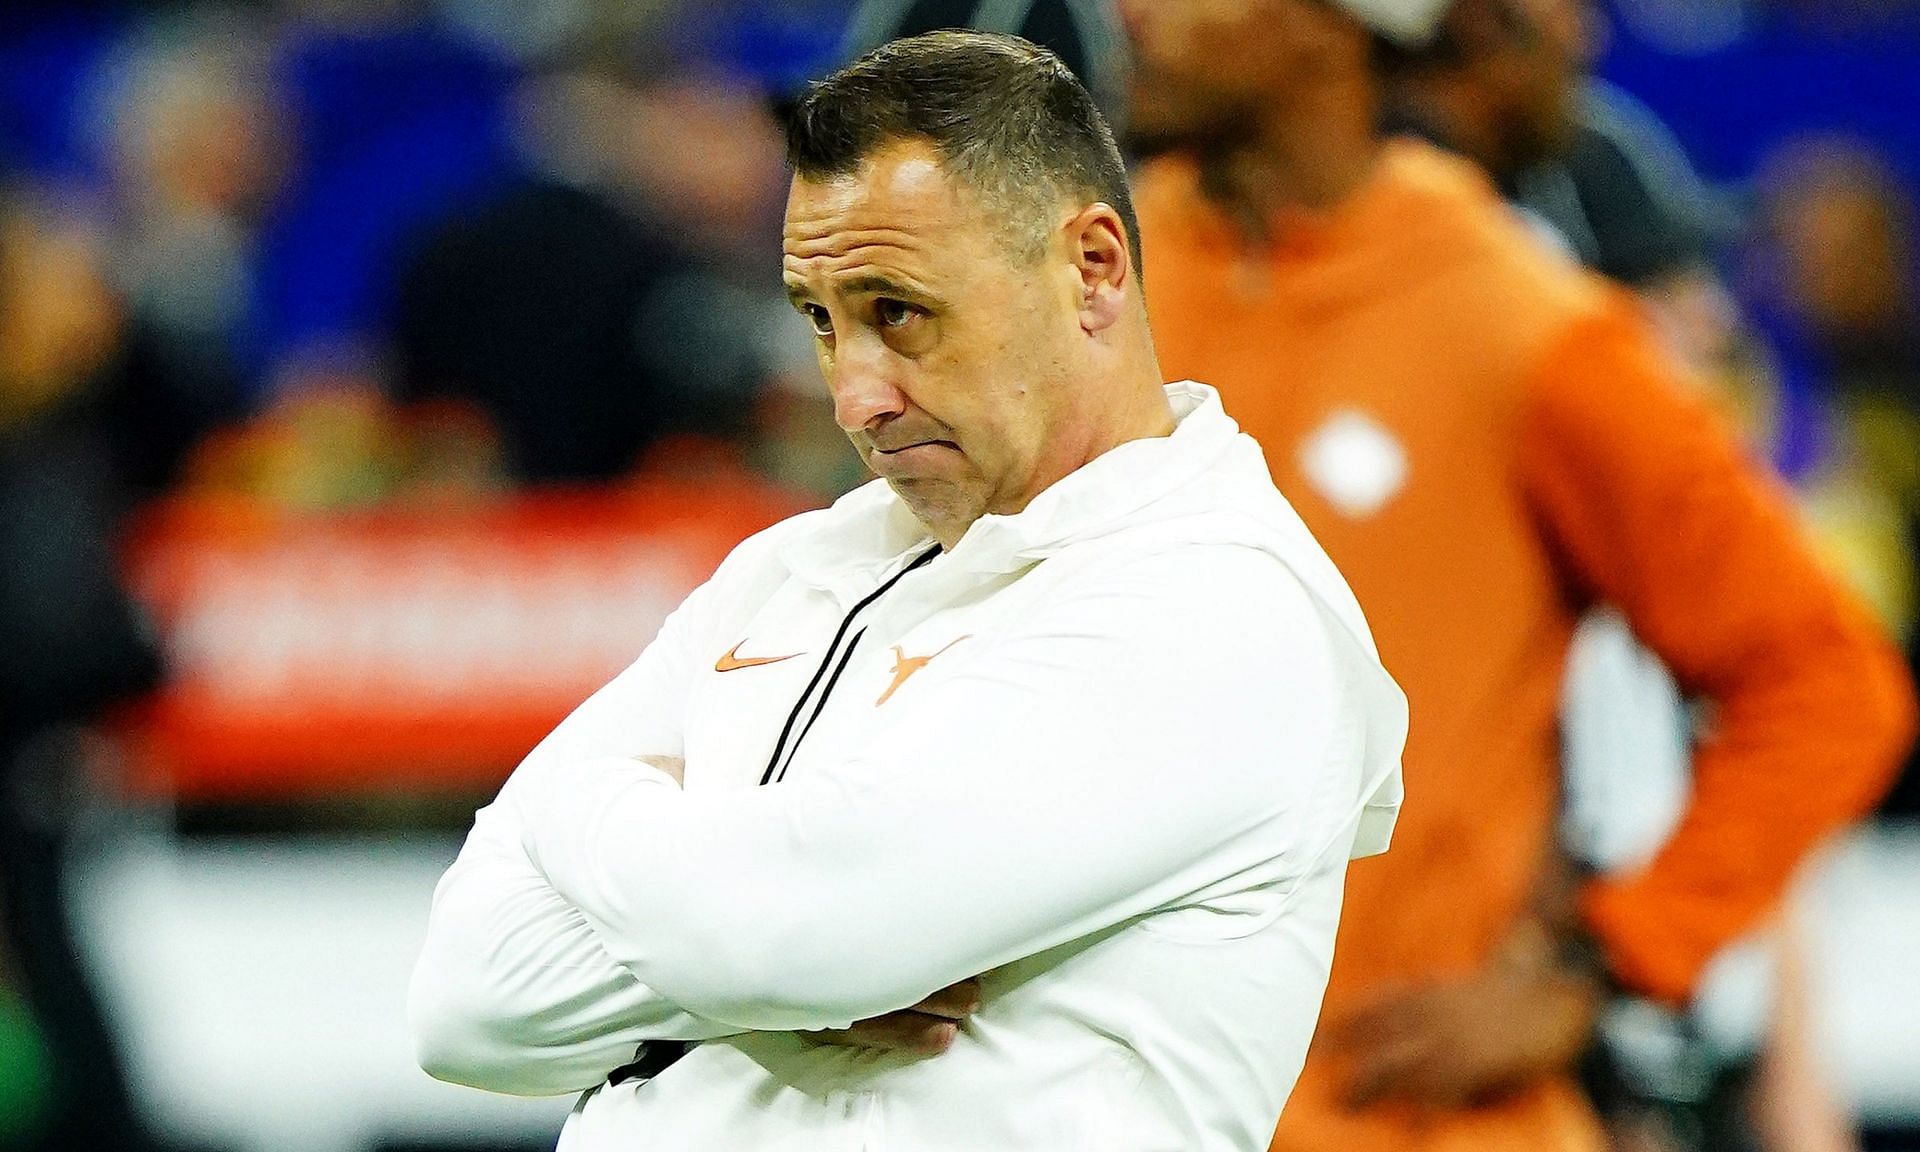 Steve Sarkisian admits alcohol issues led him to be &quot;vulnerable&quot; with recruits.